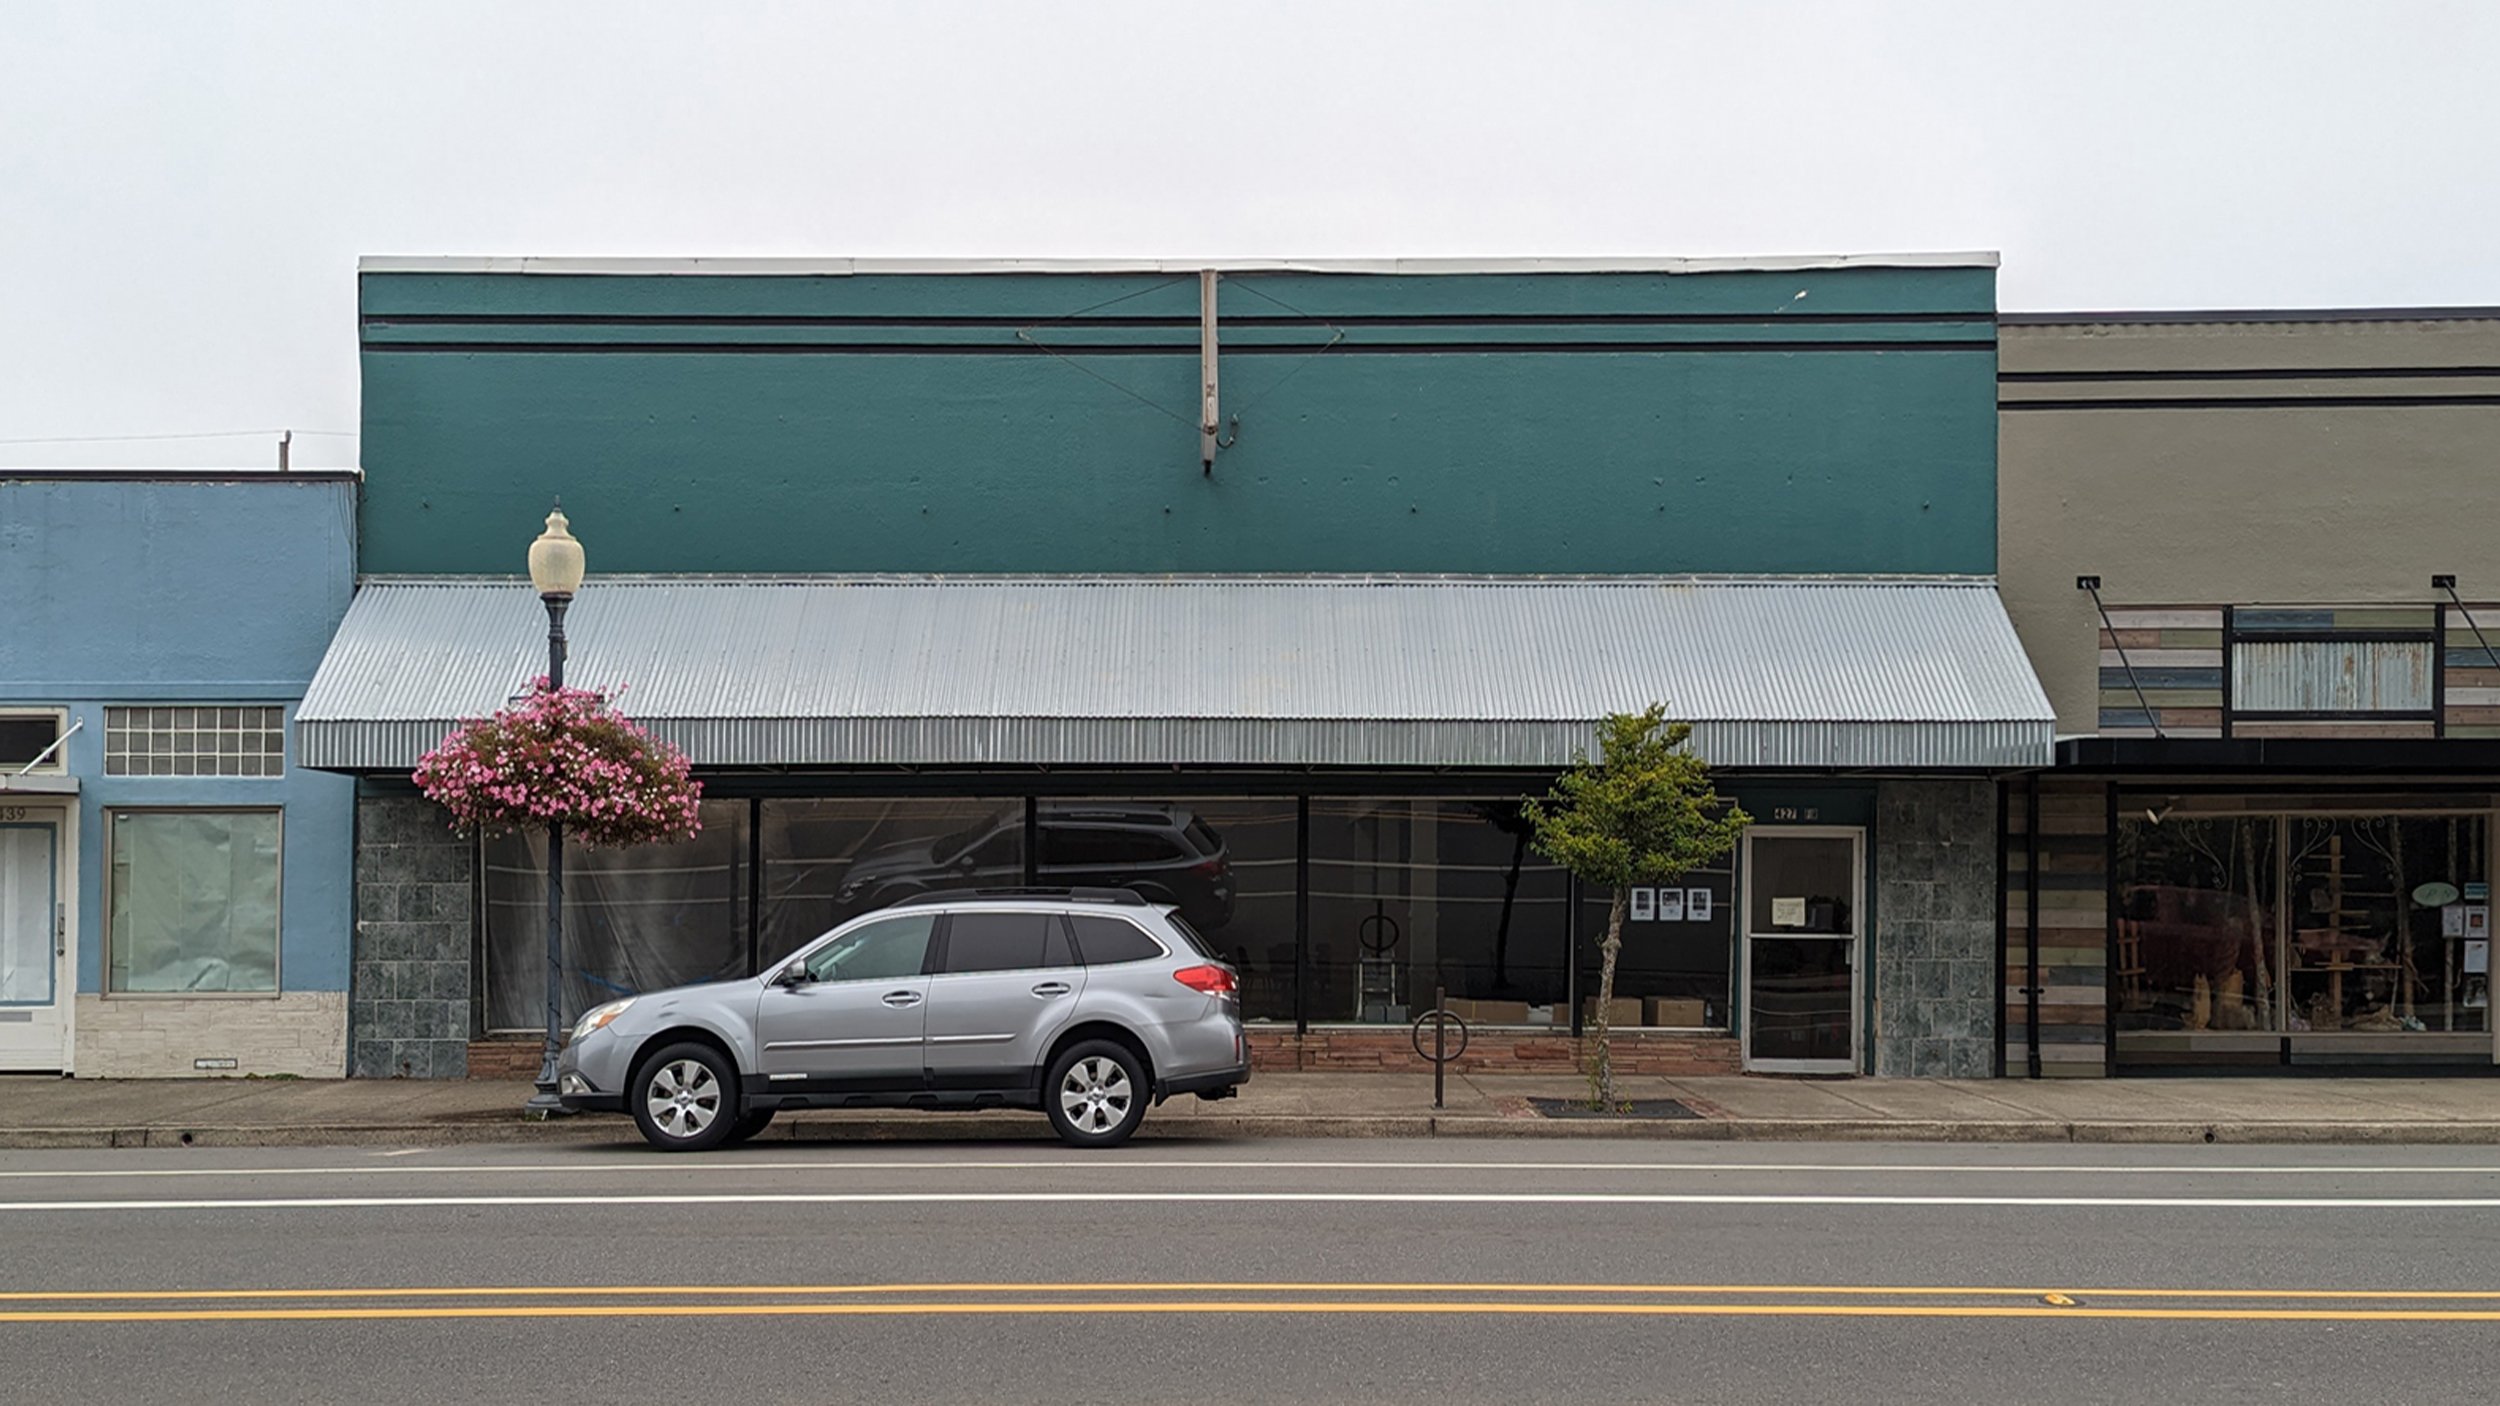  Oregon Commercial Mixed Use Design 